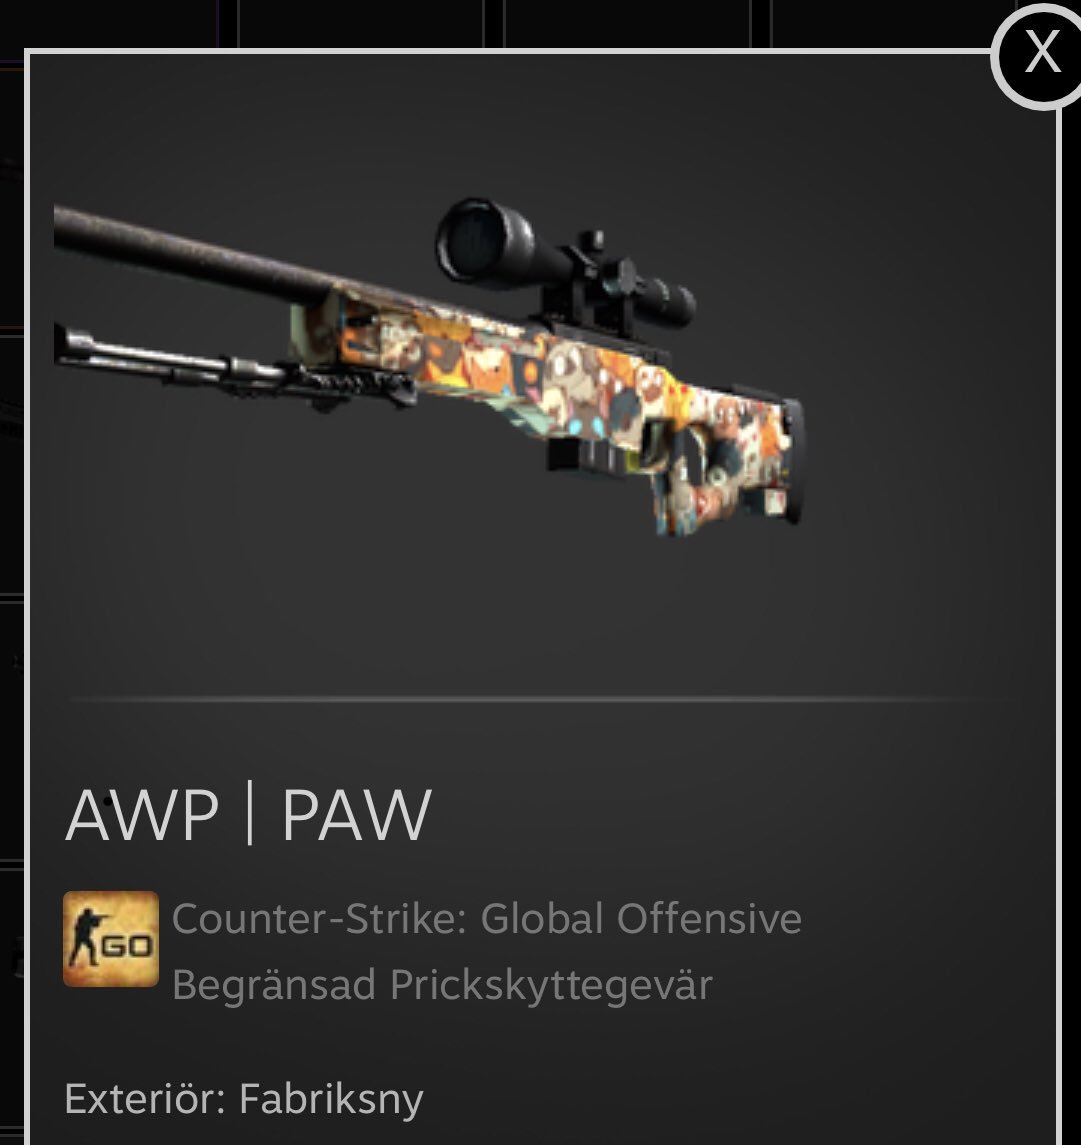 ZLASHY on Twitter: "🎁AWP PAW FN🎁 To Enter: ✓Retweet + Follow me ✓Tag 3 Friends Winner will be picked in 24Hours!⏳ GL All❤️ https://t.co/LVC2Tf1Qrb" / Twitter